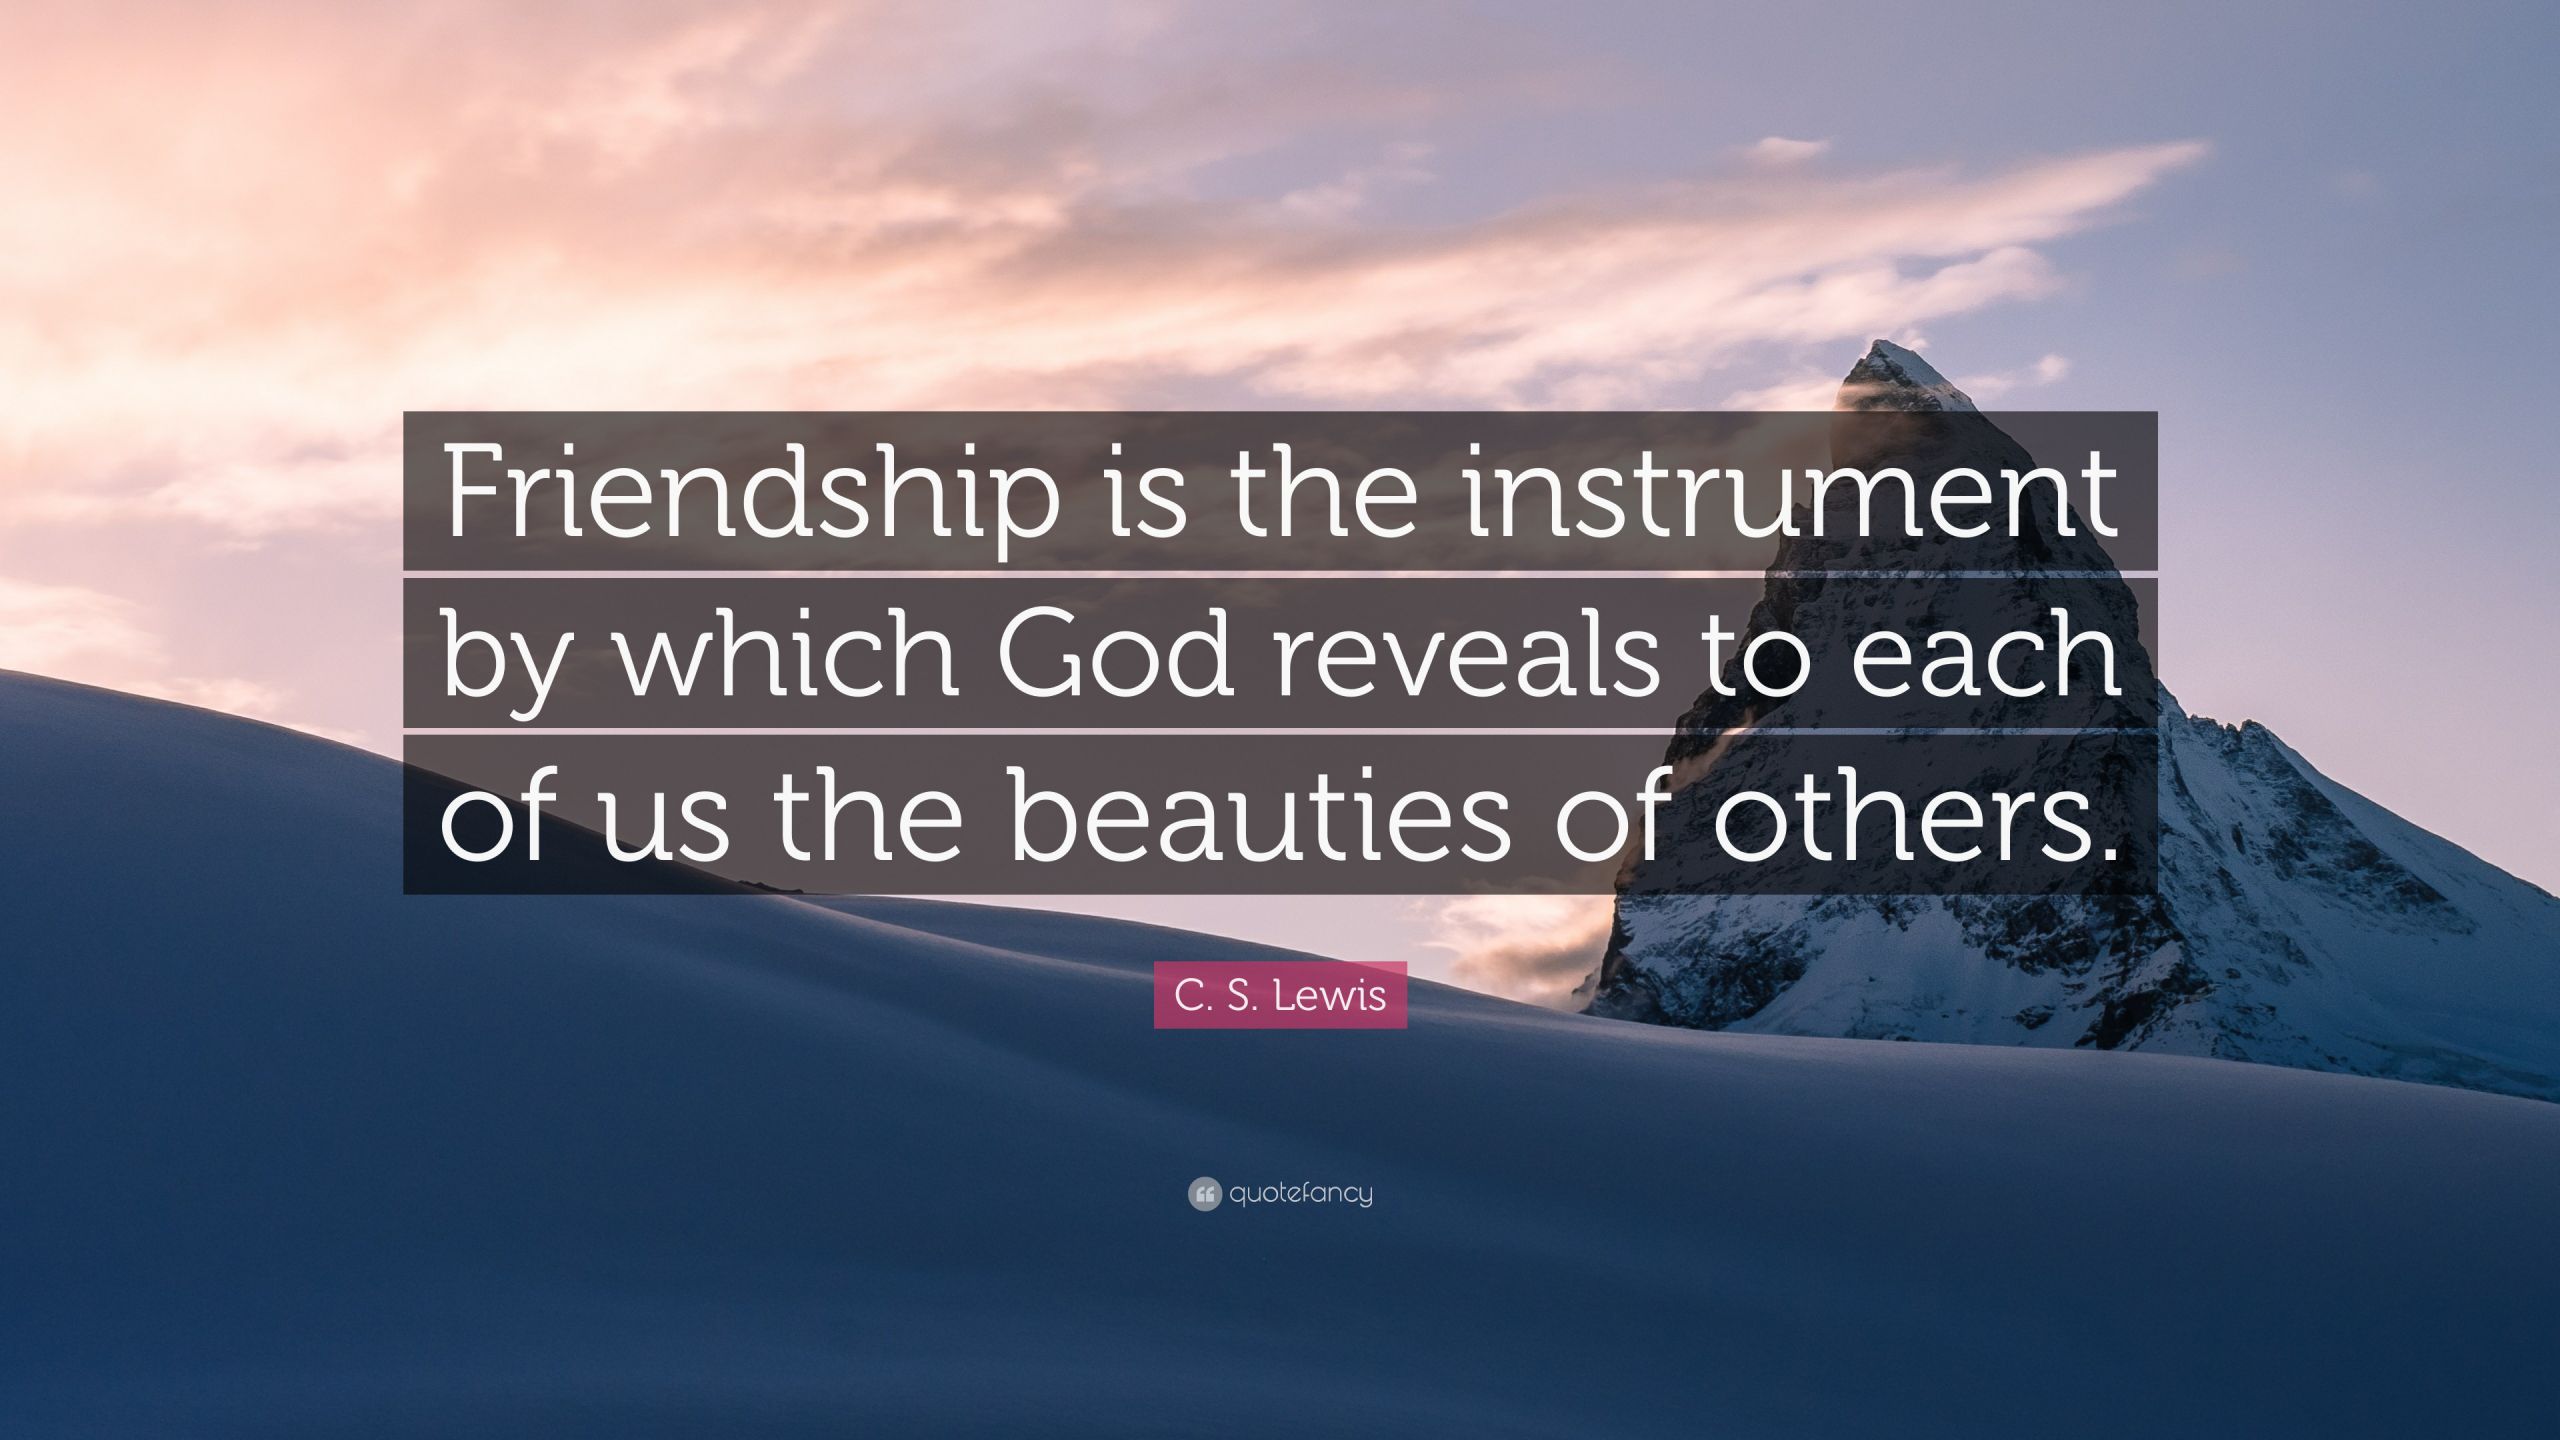 C.S.Lewis Quotes On Friendship
 C S Lewis Quote “Friendship is the instrument by which